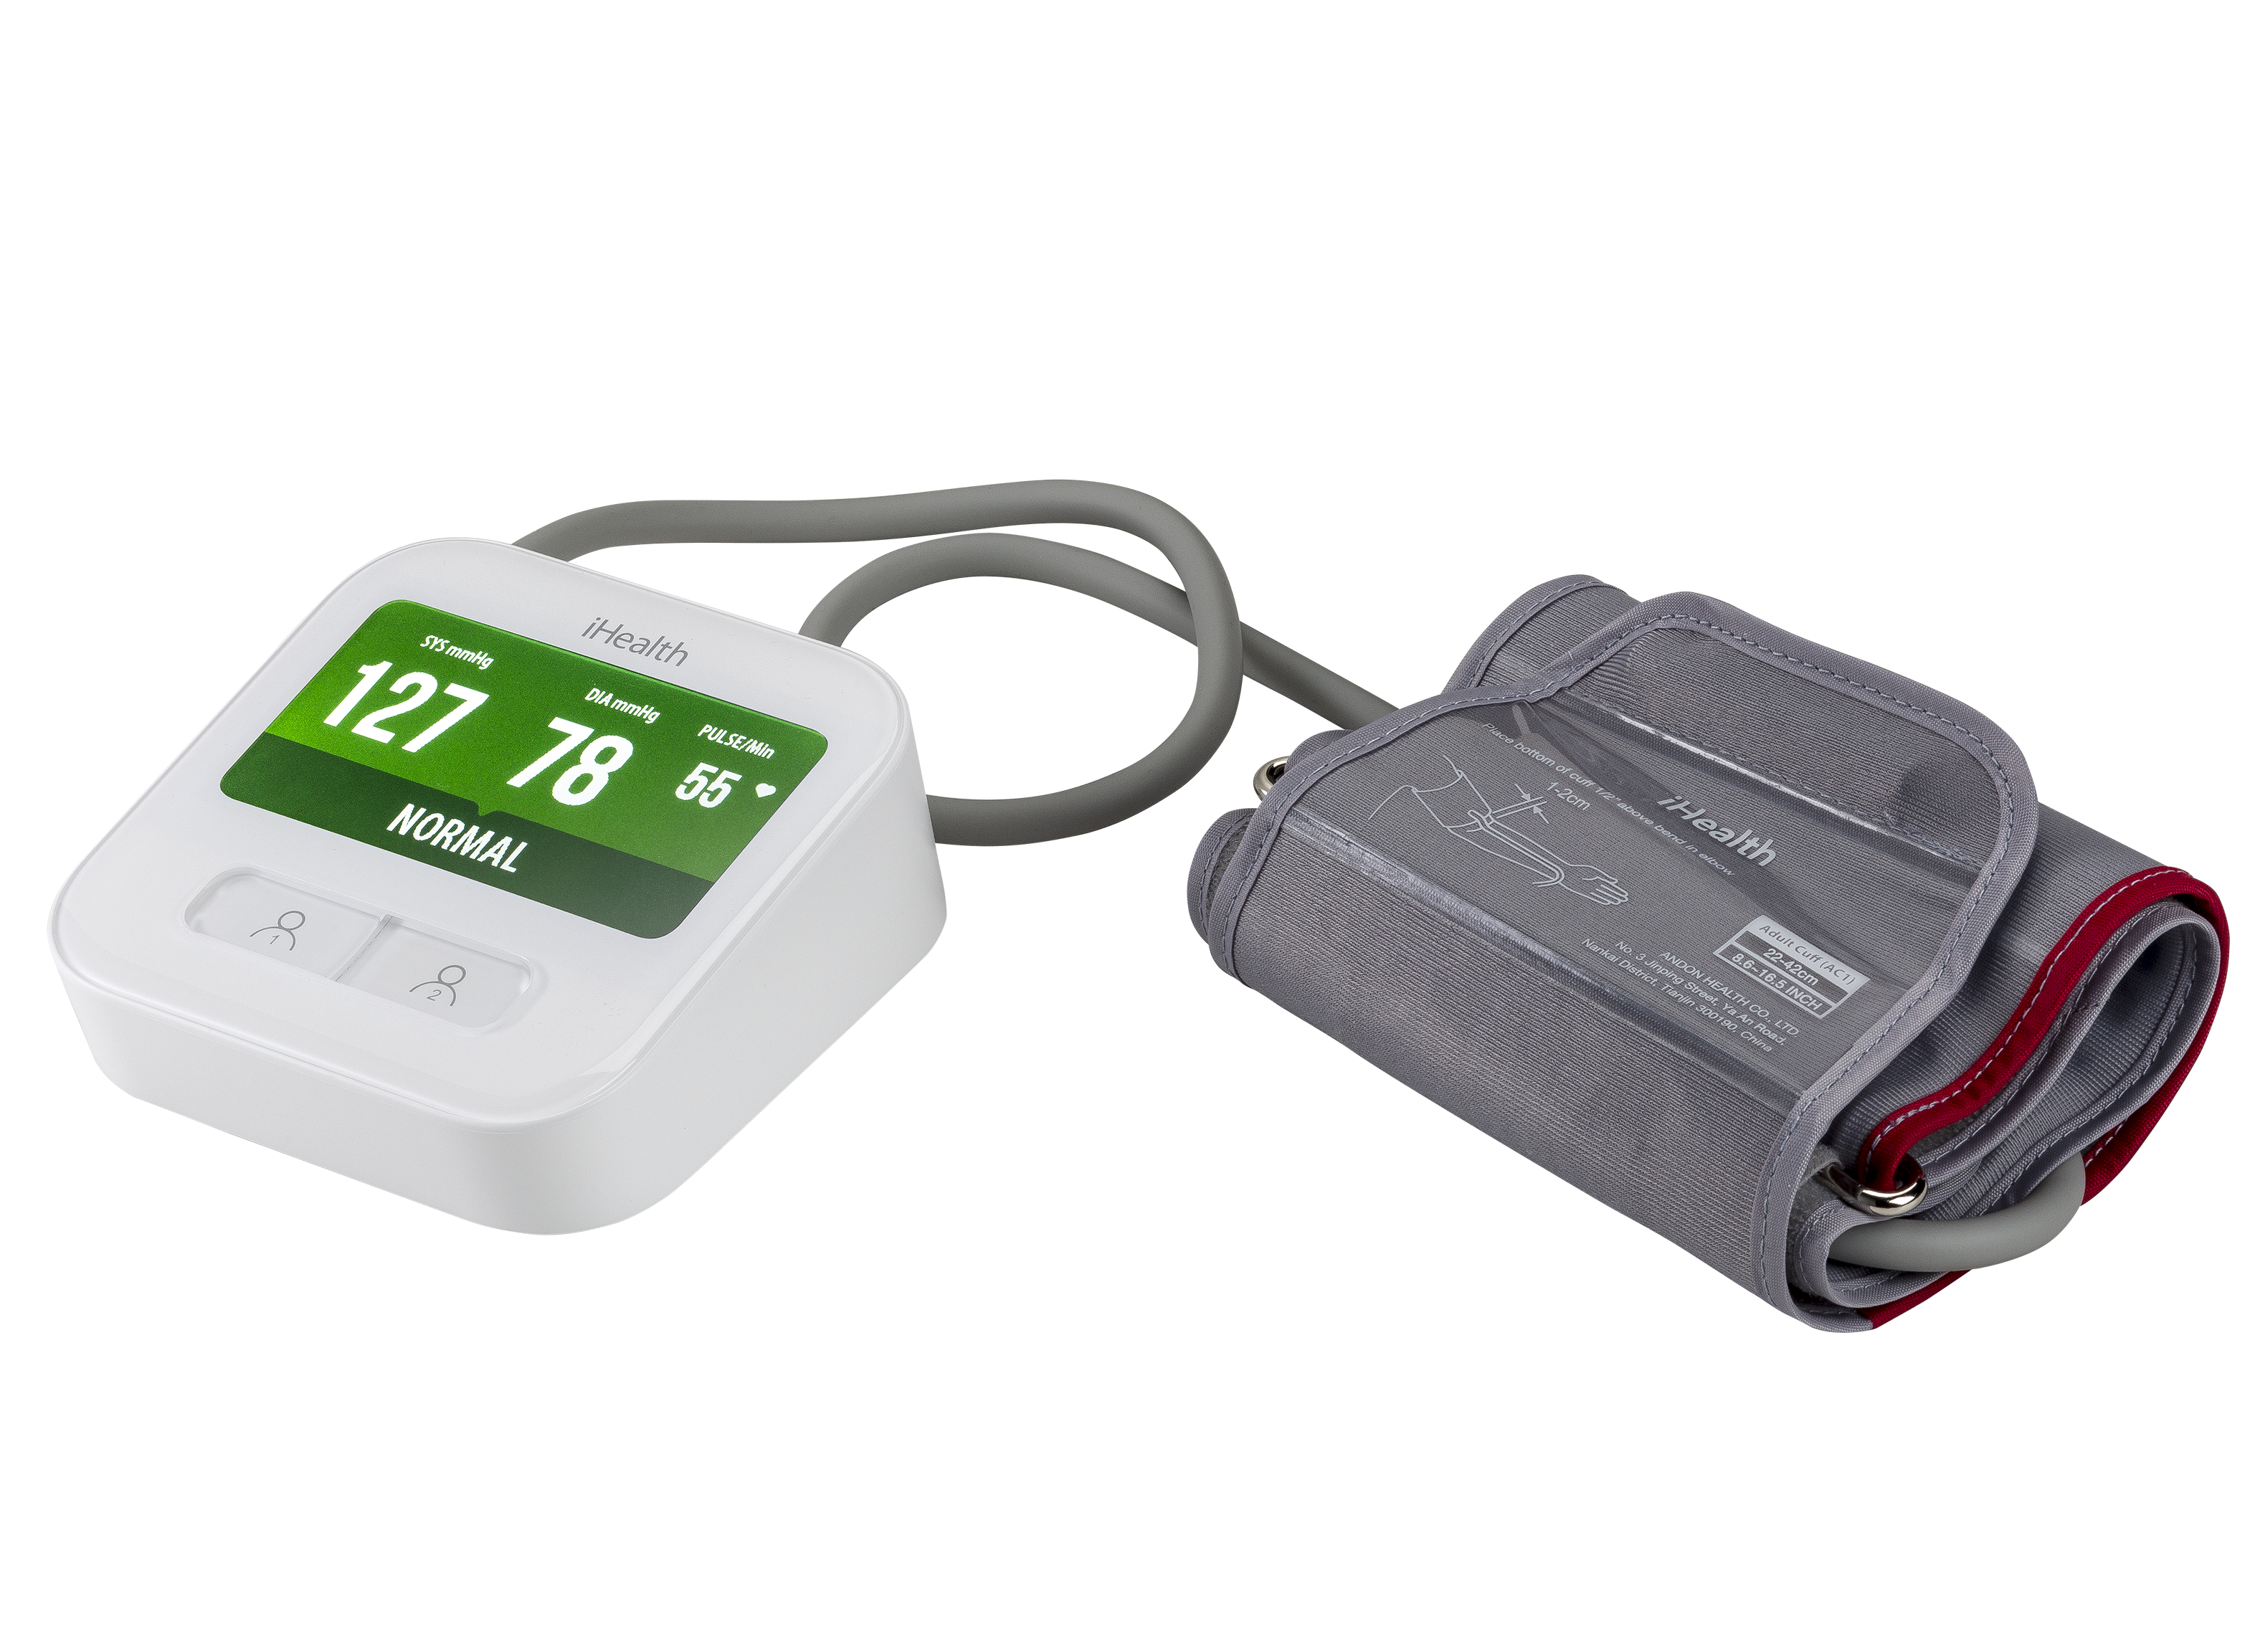 https://crdms.images.consumerreports.org/prod/products/cr/models/392826-bloodpressuremonitors-ihealth-clearbpm1.png